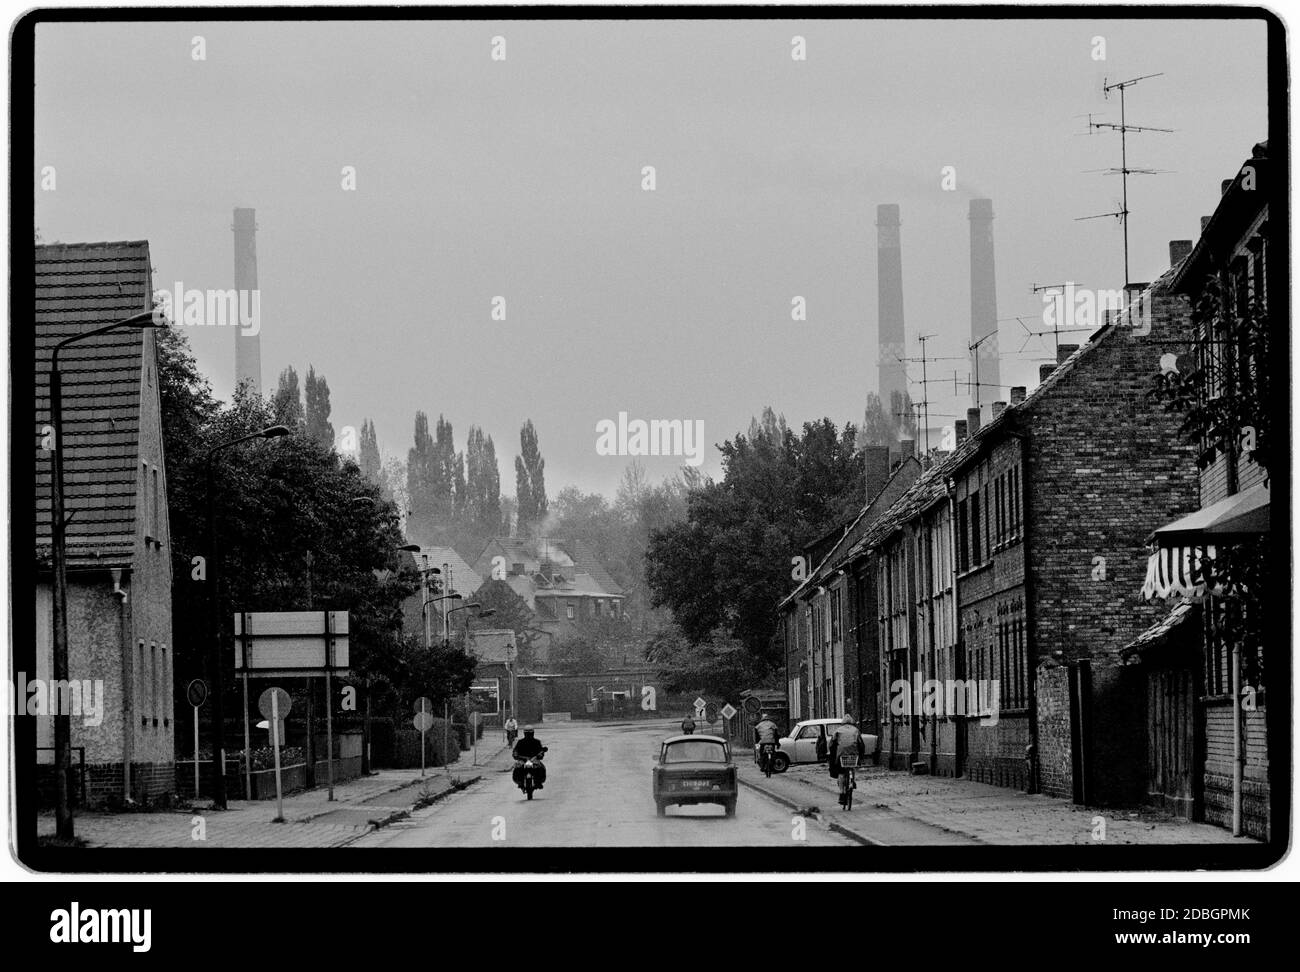 East Germany 1990 scanned in 2020 Wolfen, near Bitterfeld, is a town in the district Anhalt-Bitterfeld, Saxony-Anhalt, Germany. Orwo film was produced here in the 1980’s. Since 2007 known as Bitterfeld-Wolfen. East Germany, Deutsche Demokratische Republik the DDR after the fall of the Wall but before reunification March 1990 and scanned in 2020.East Germany, officially the German Democratic Republic, was a country that existed from 1949 to 1990, the period when the eastern portion of Germany was part of the Eastern Bloc during the Cold War. Stock Photo